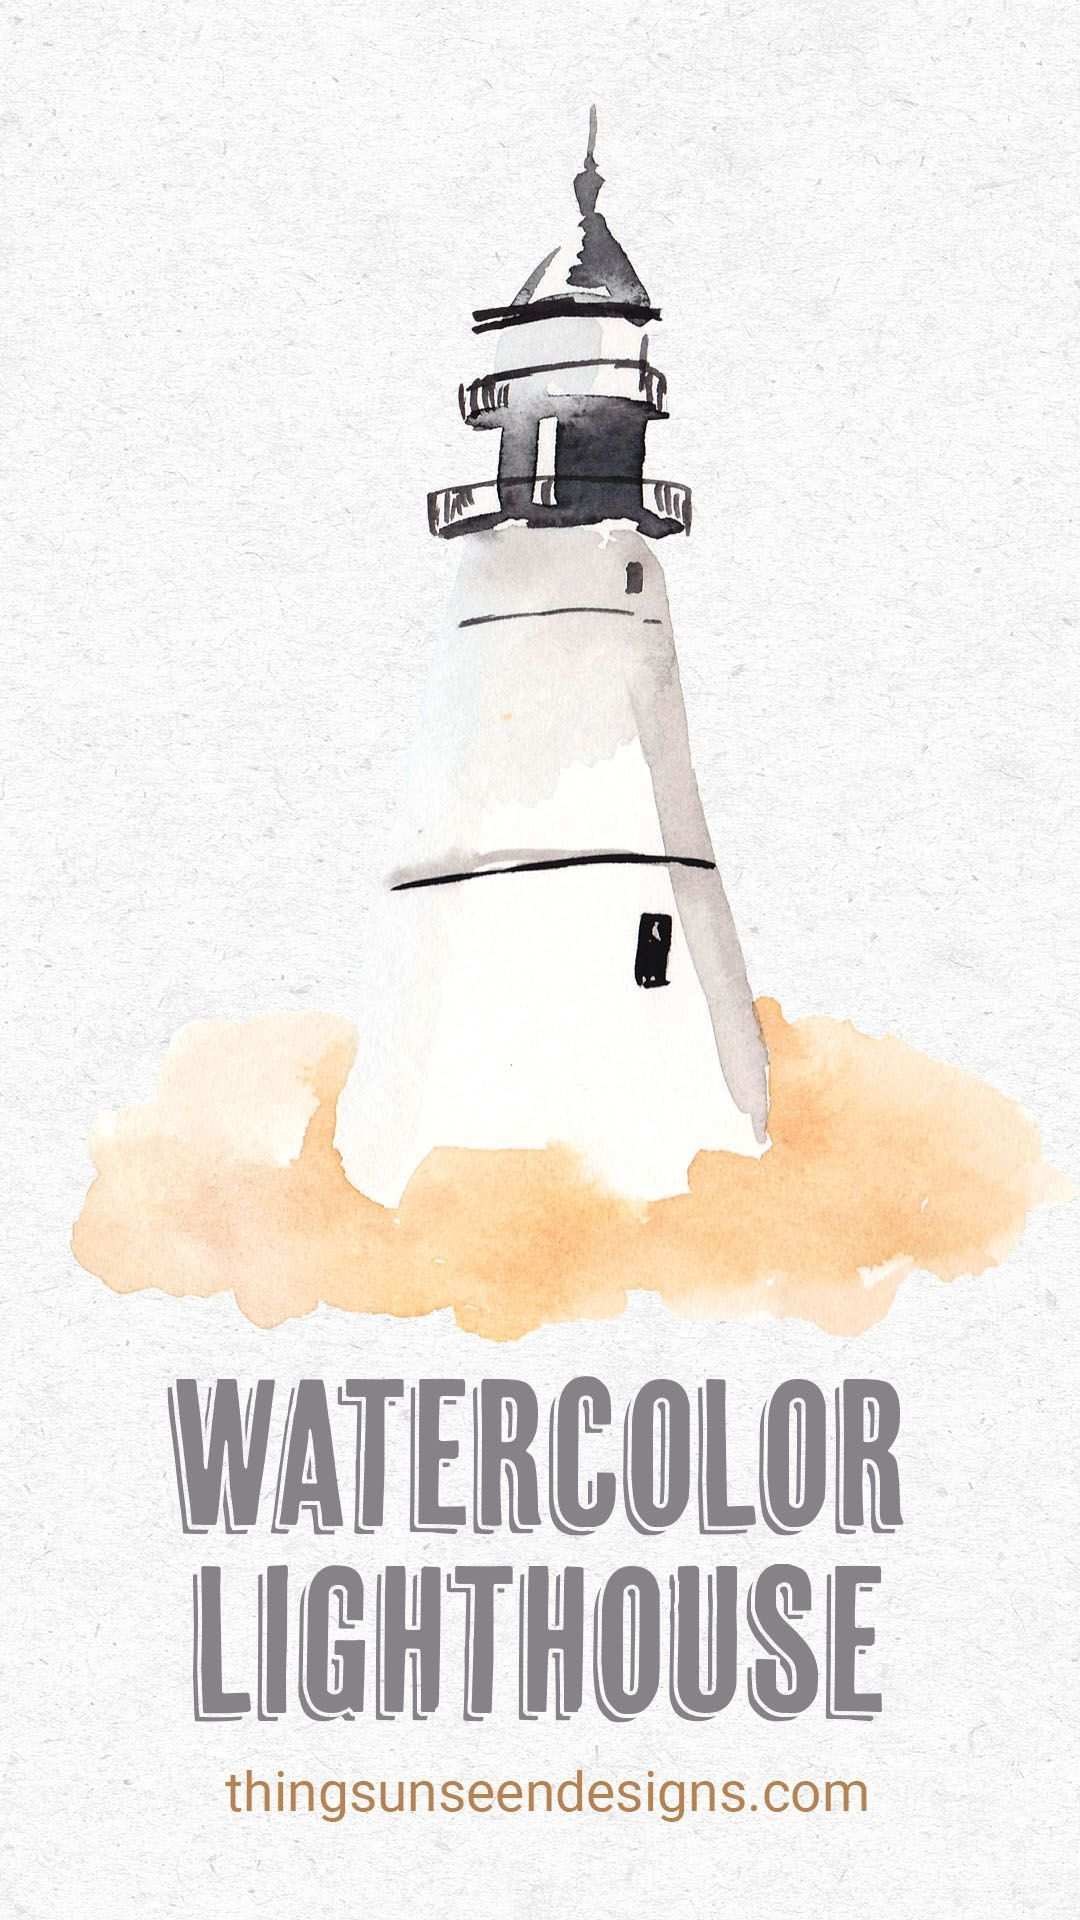 Learn How To Paint These Watercolor Lighthouses In A Loose Style In My Blog Post Youtube Video Also Available In 2020 Aquarell Malen Aquarell Ideen Aquarellmalerei